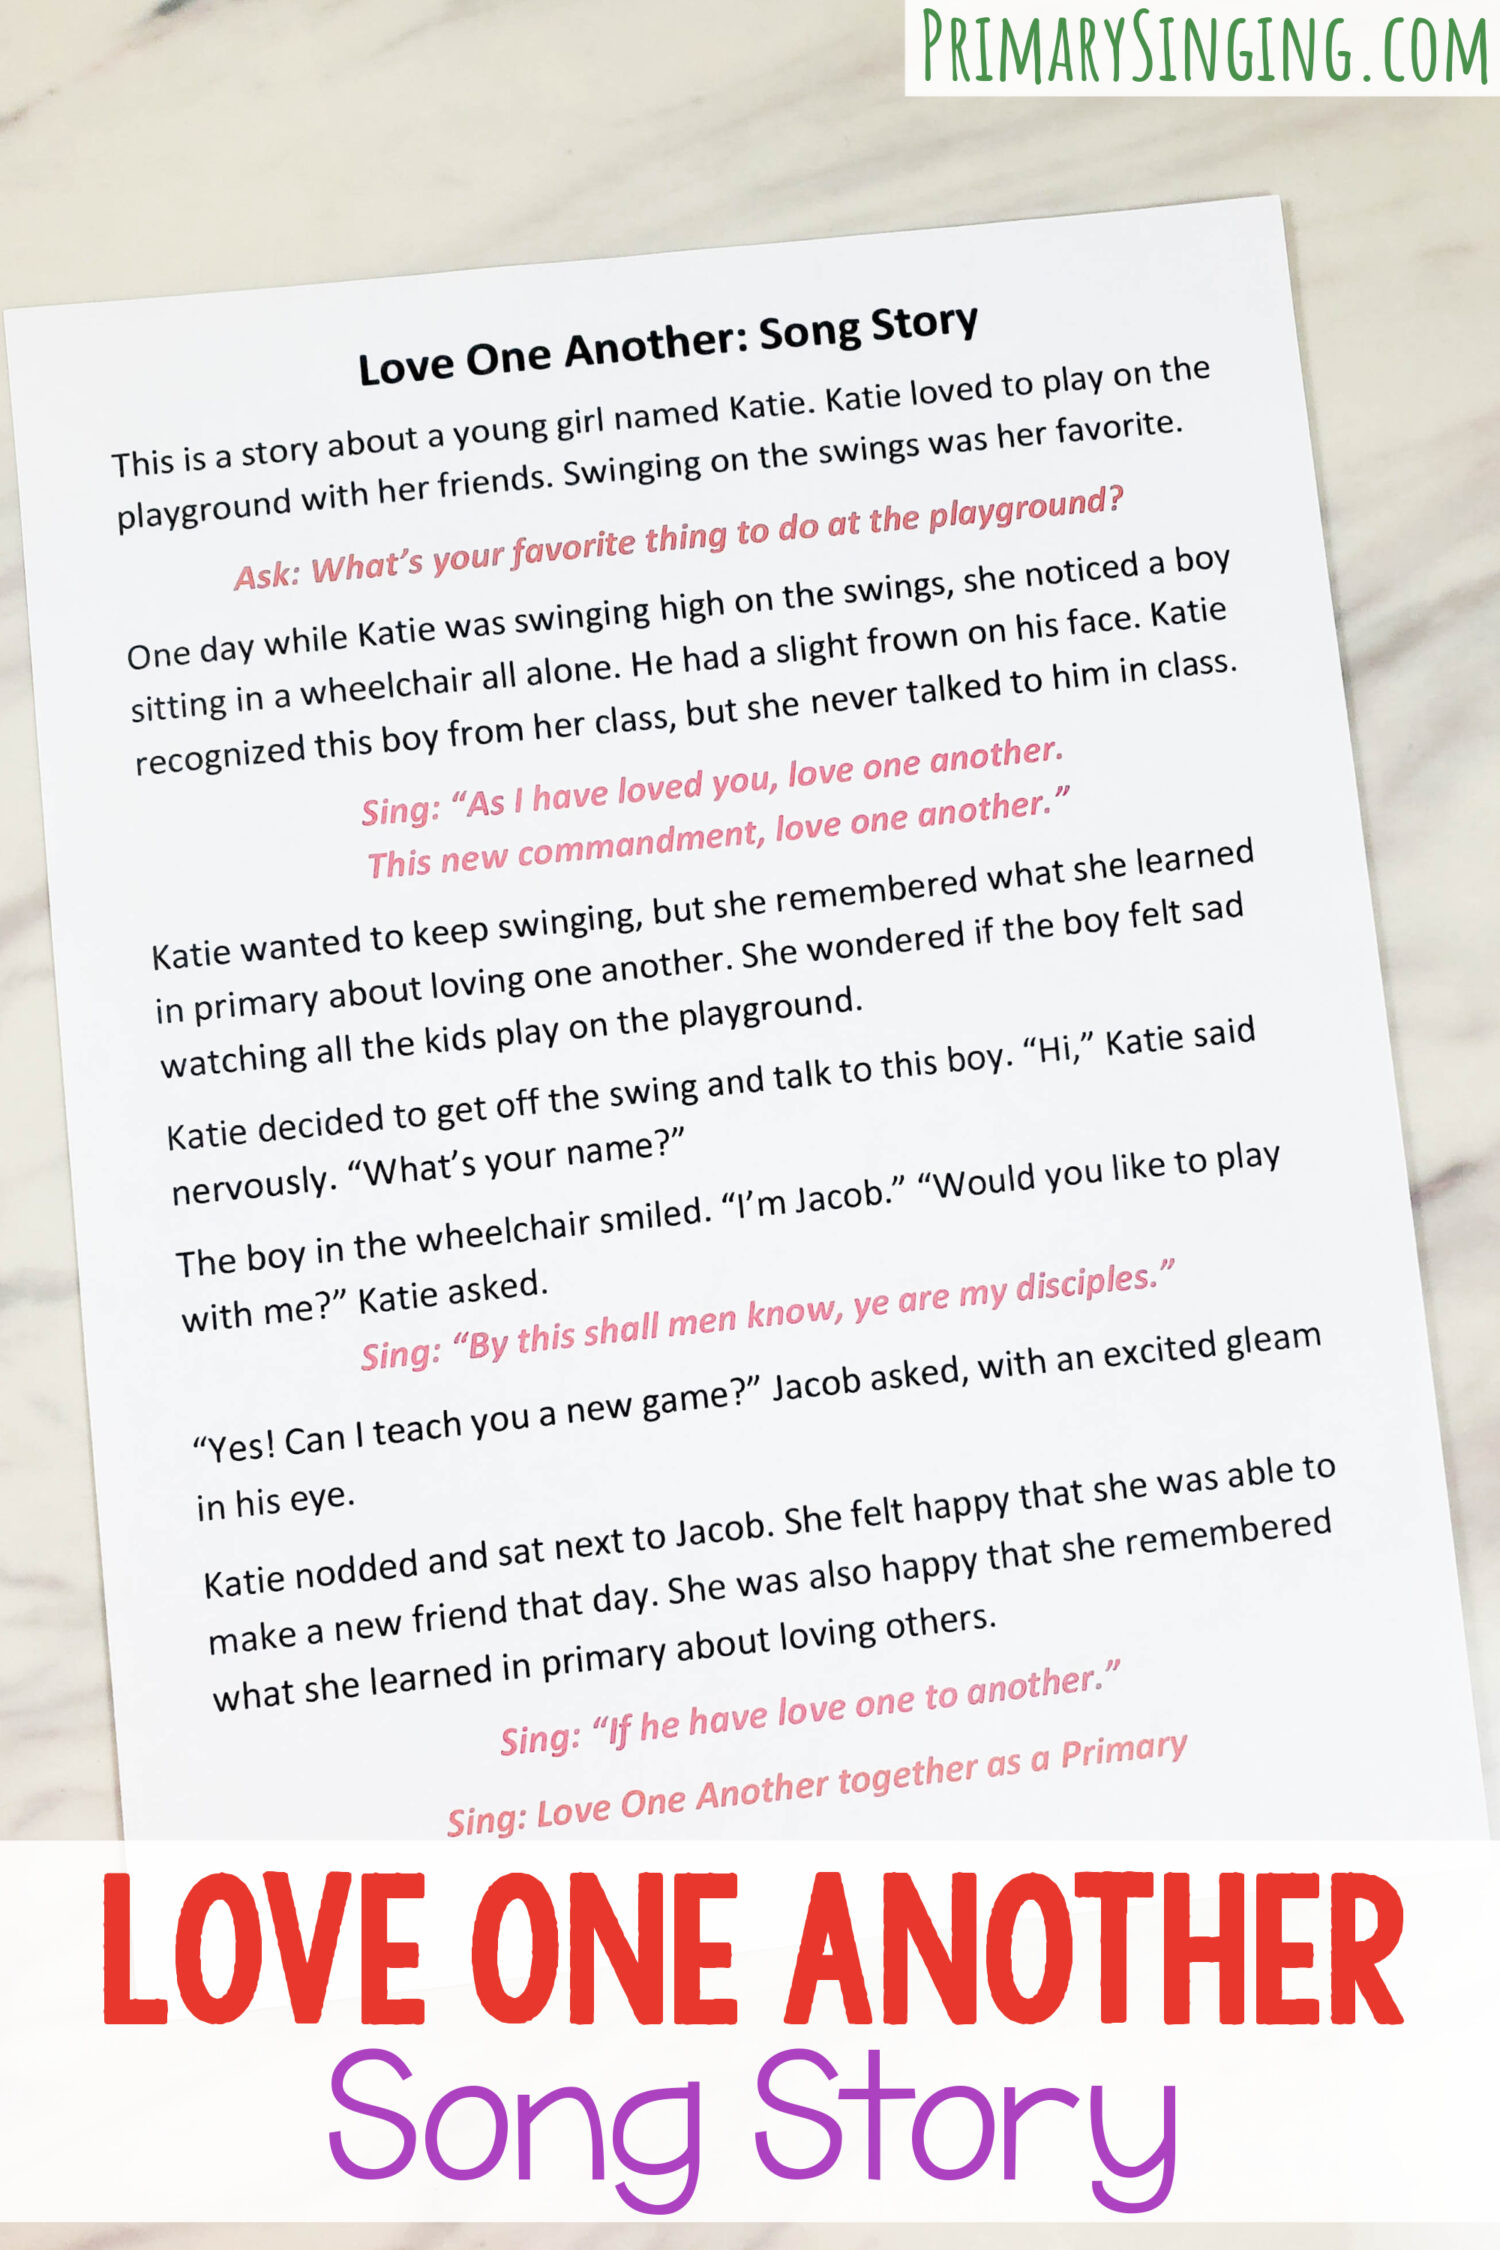 Love One Another 1-page printable song story lesson plan for singing time main picture